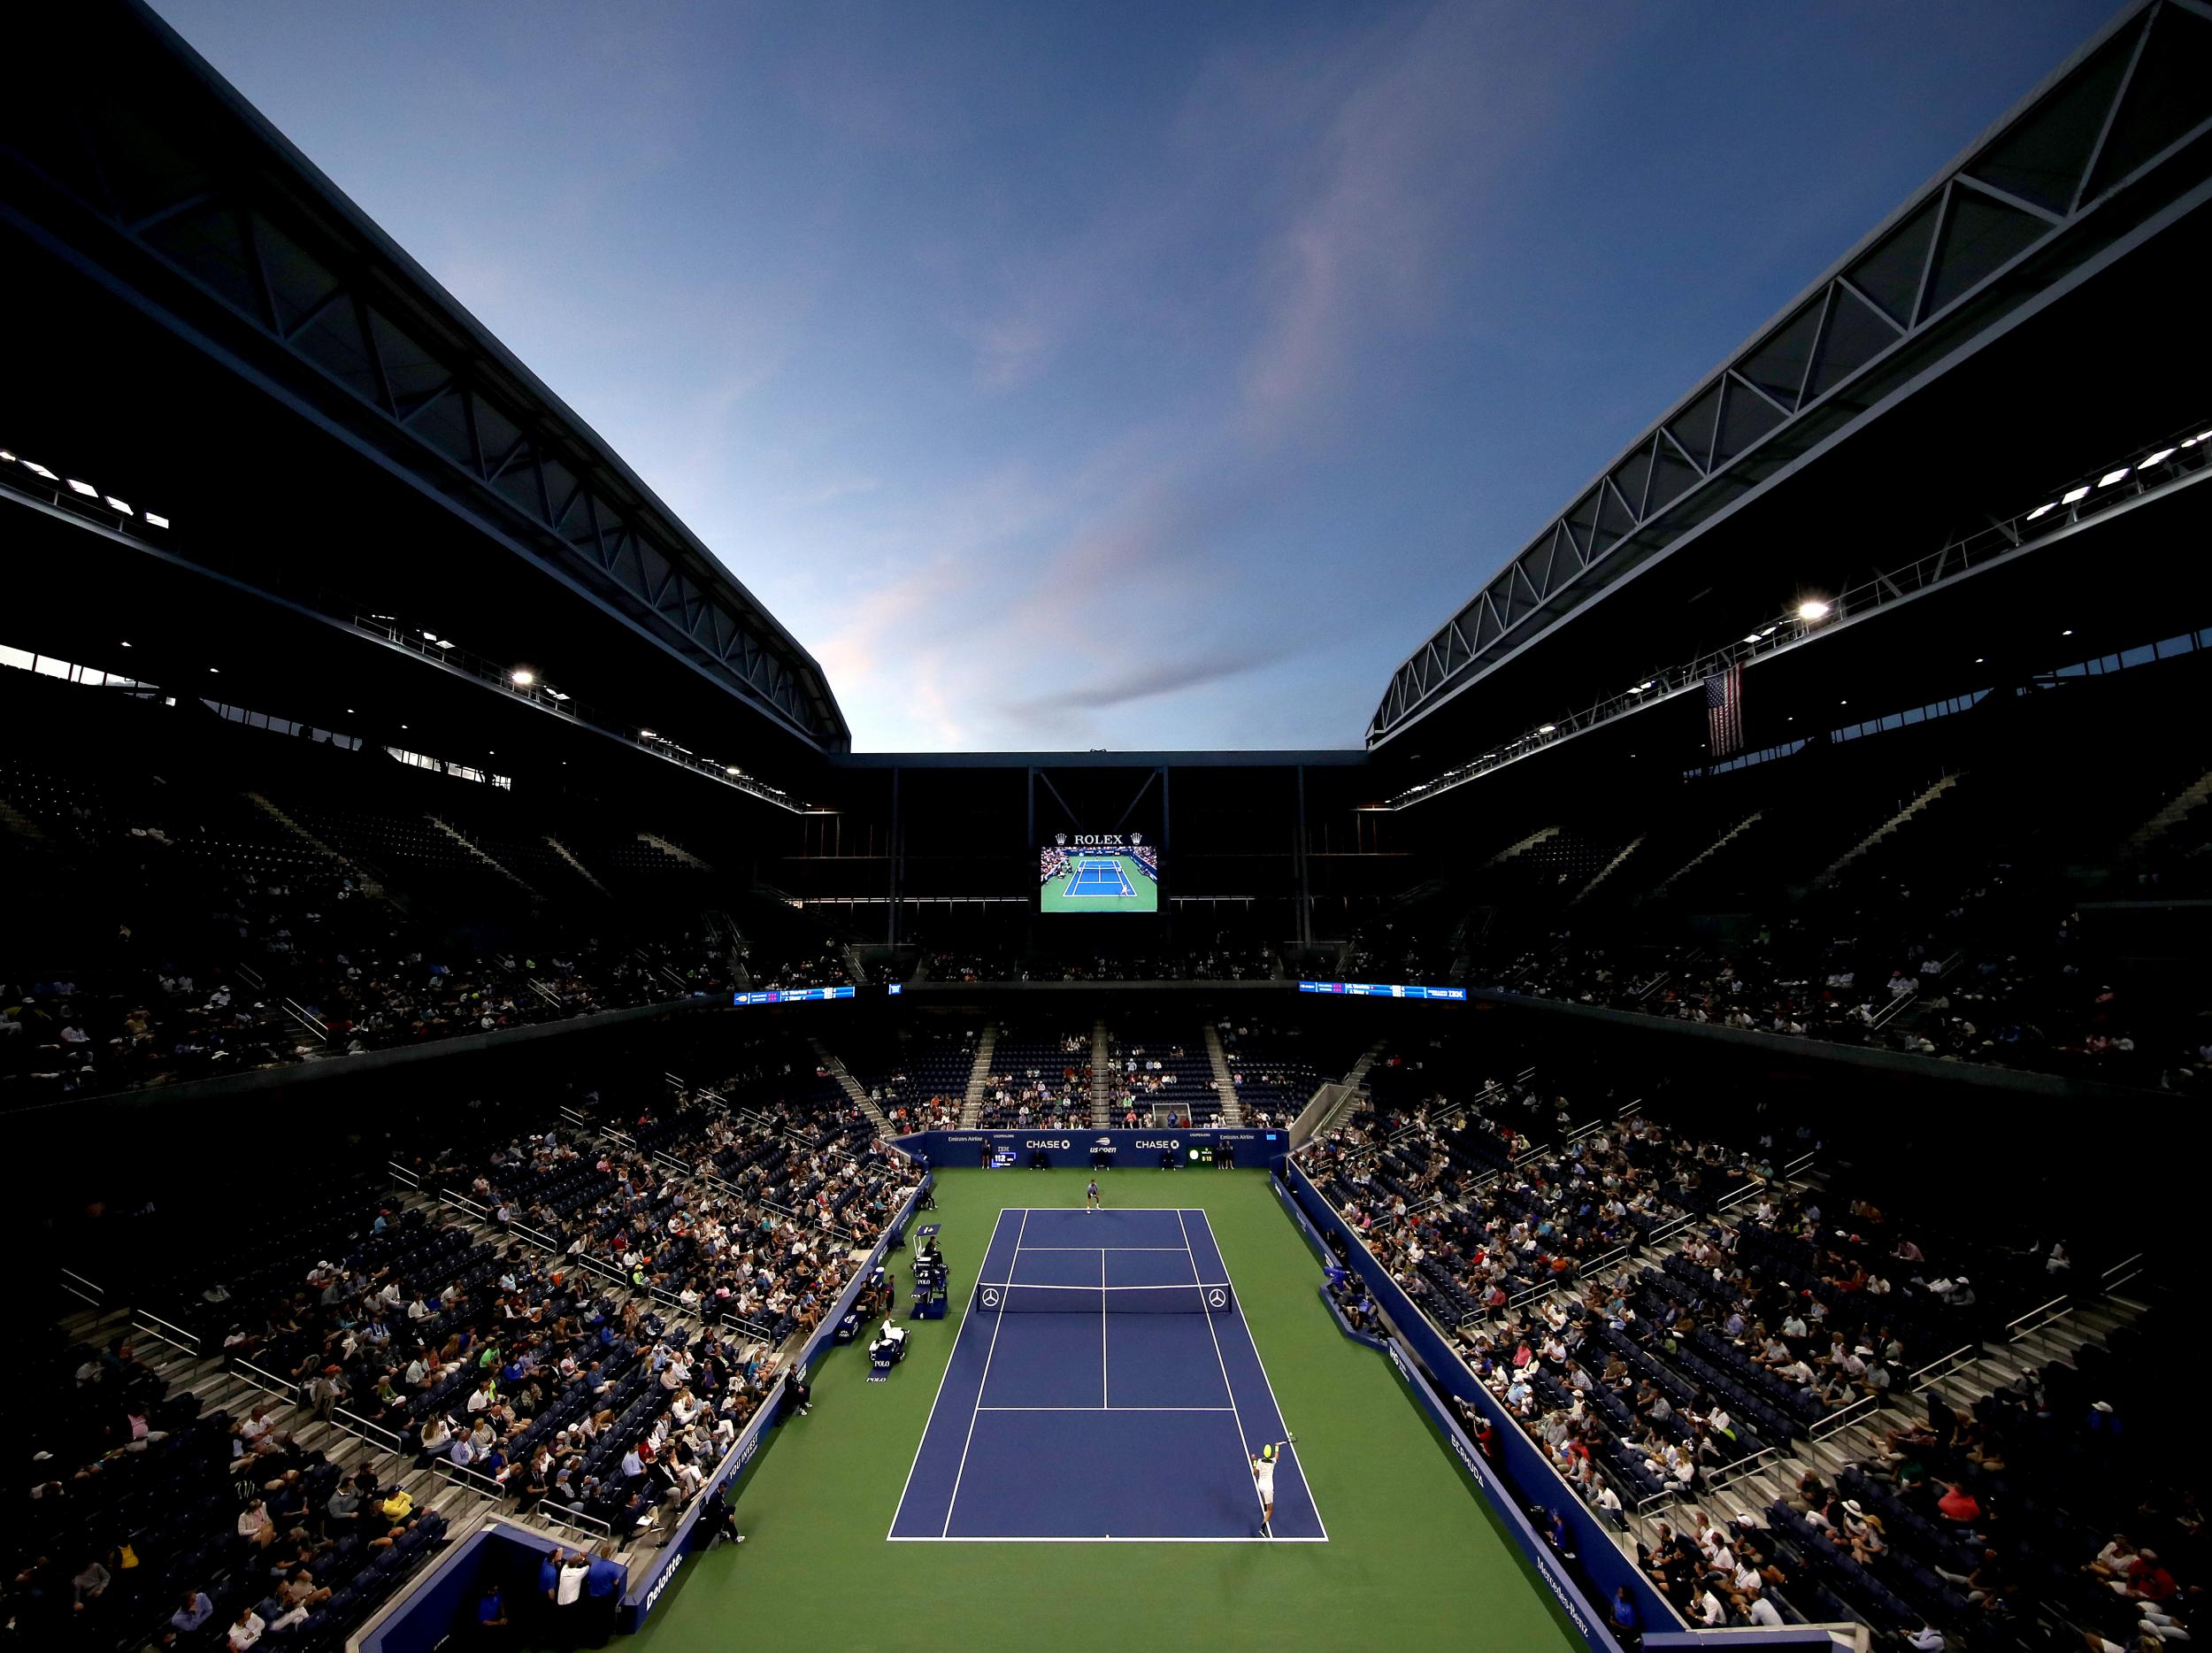 The order of play for the third day of the 2019 US Open